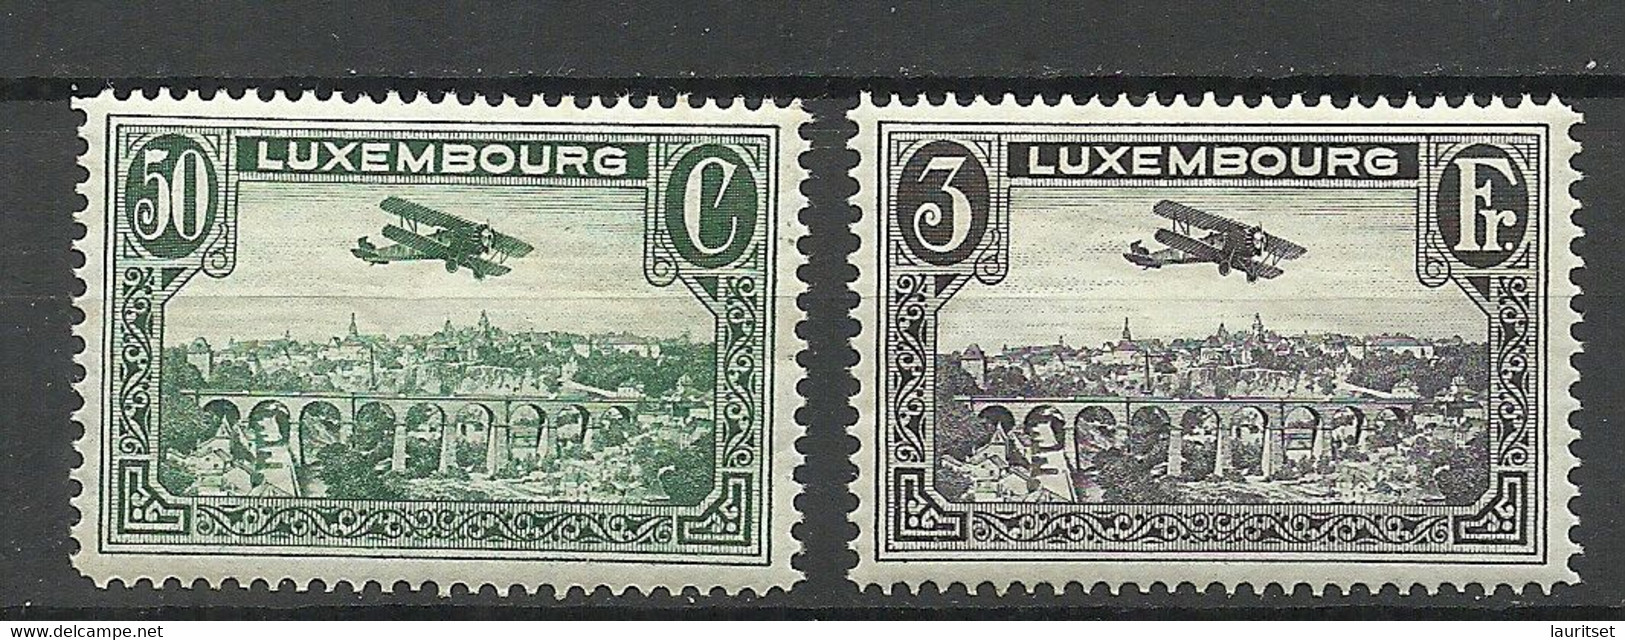 LUXEMBOURG Luxemburg 1933 Michel 250 - 251 Flugpost Air Mail Air Plane Doppeldecker MNH - Unused Stamps